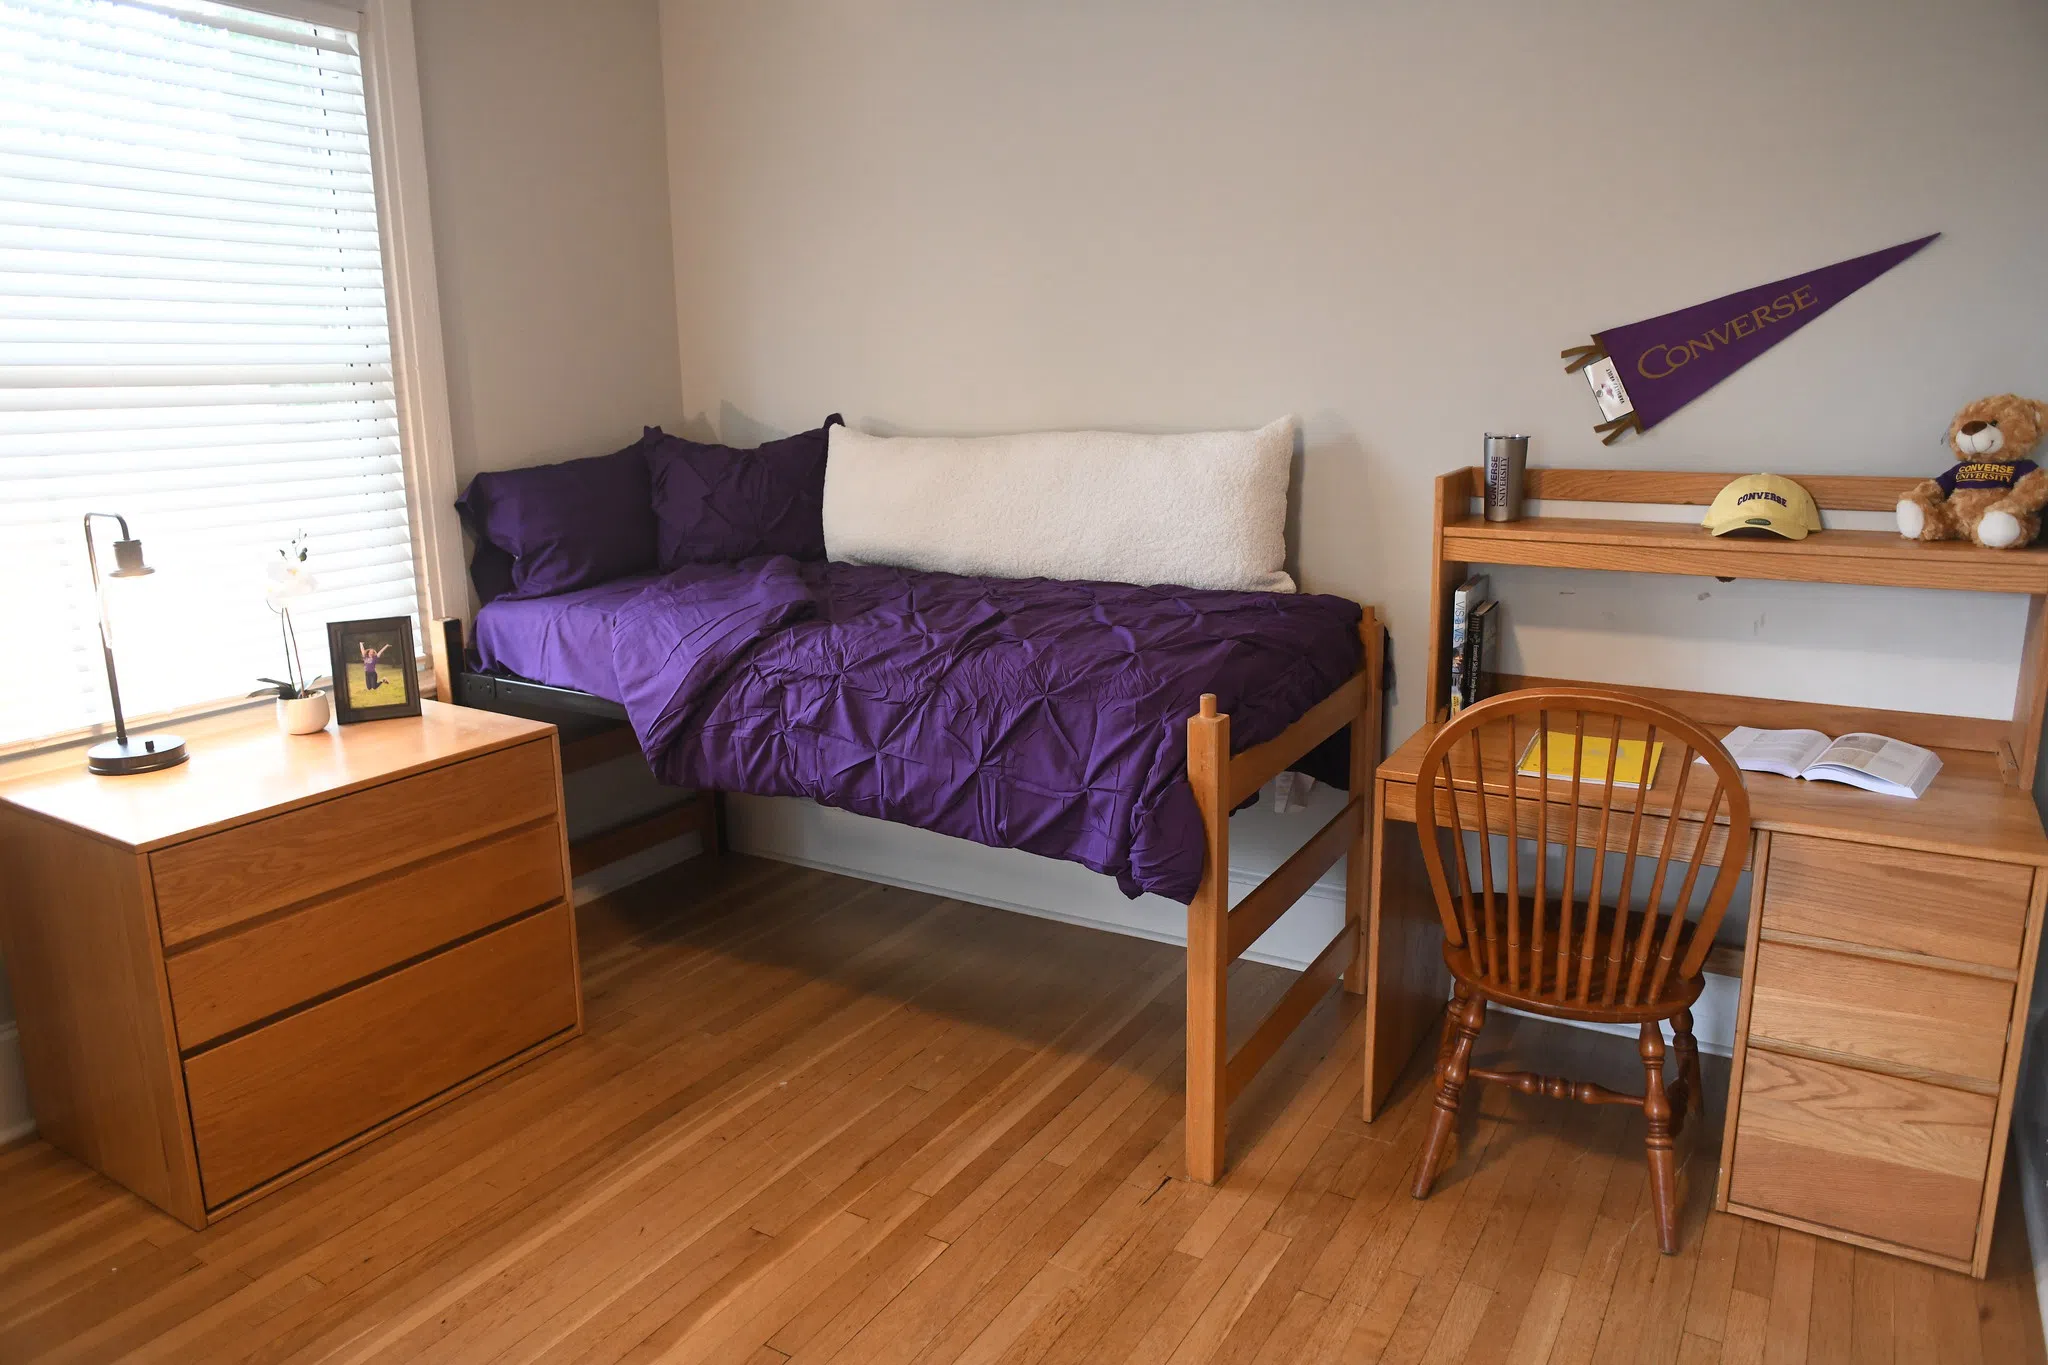 A lofted bed with purple blanket and pillow appears in a corner between a desk on the left and a bedside chest with three drawers below a window on the right.